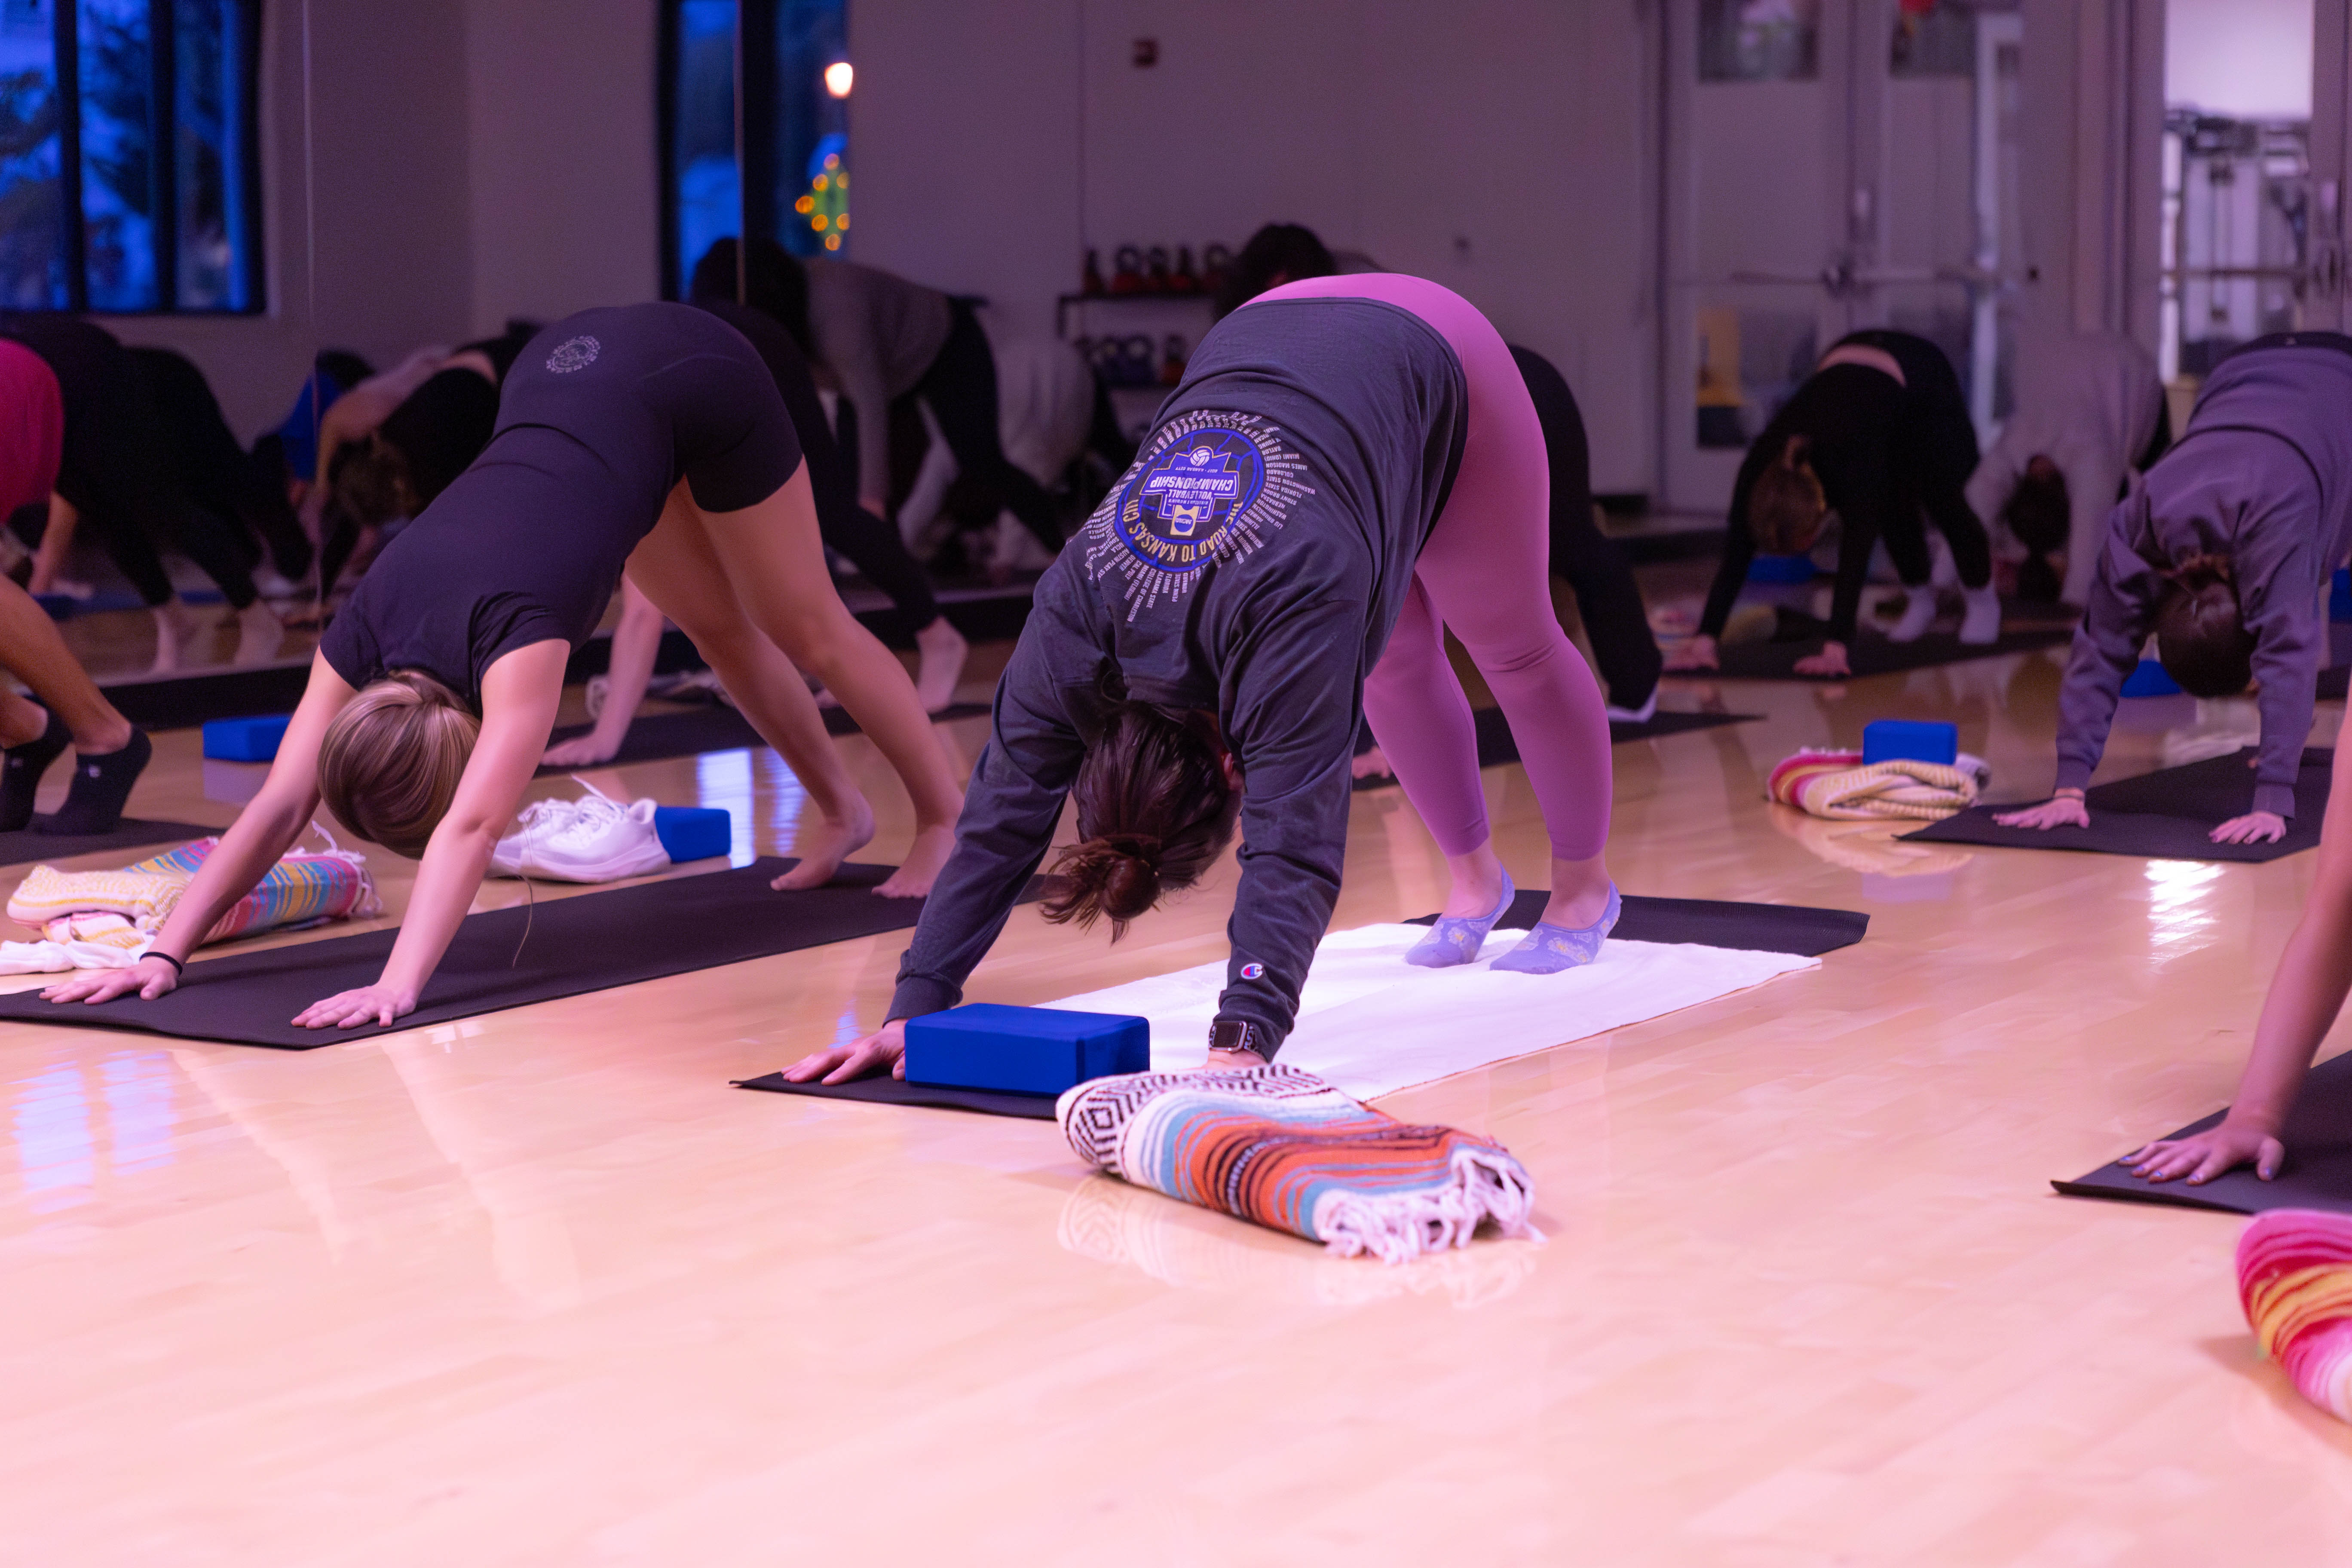 STRETCH: Yoga attendees stretch in downward dog position during the fitness class on Feb 14 as part of the LoveWell event to promote self care. / Photo by Rebecca Harper